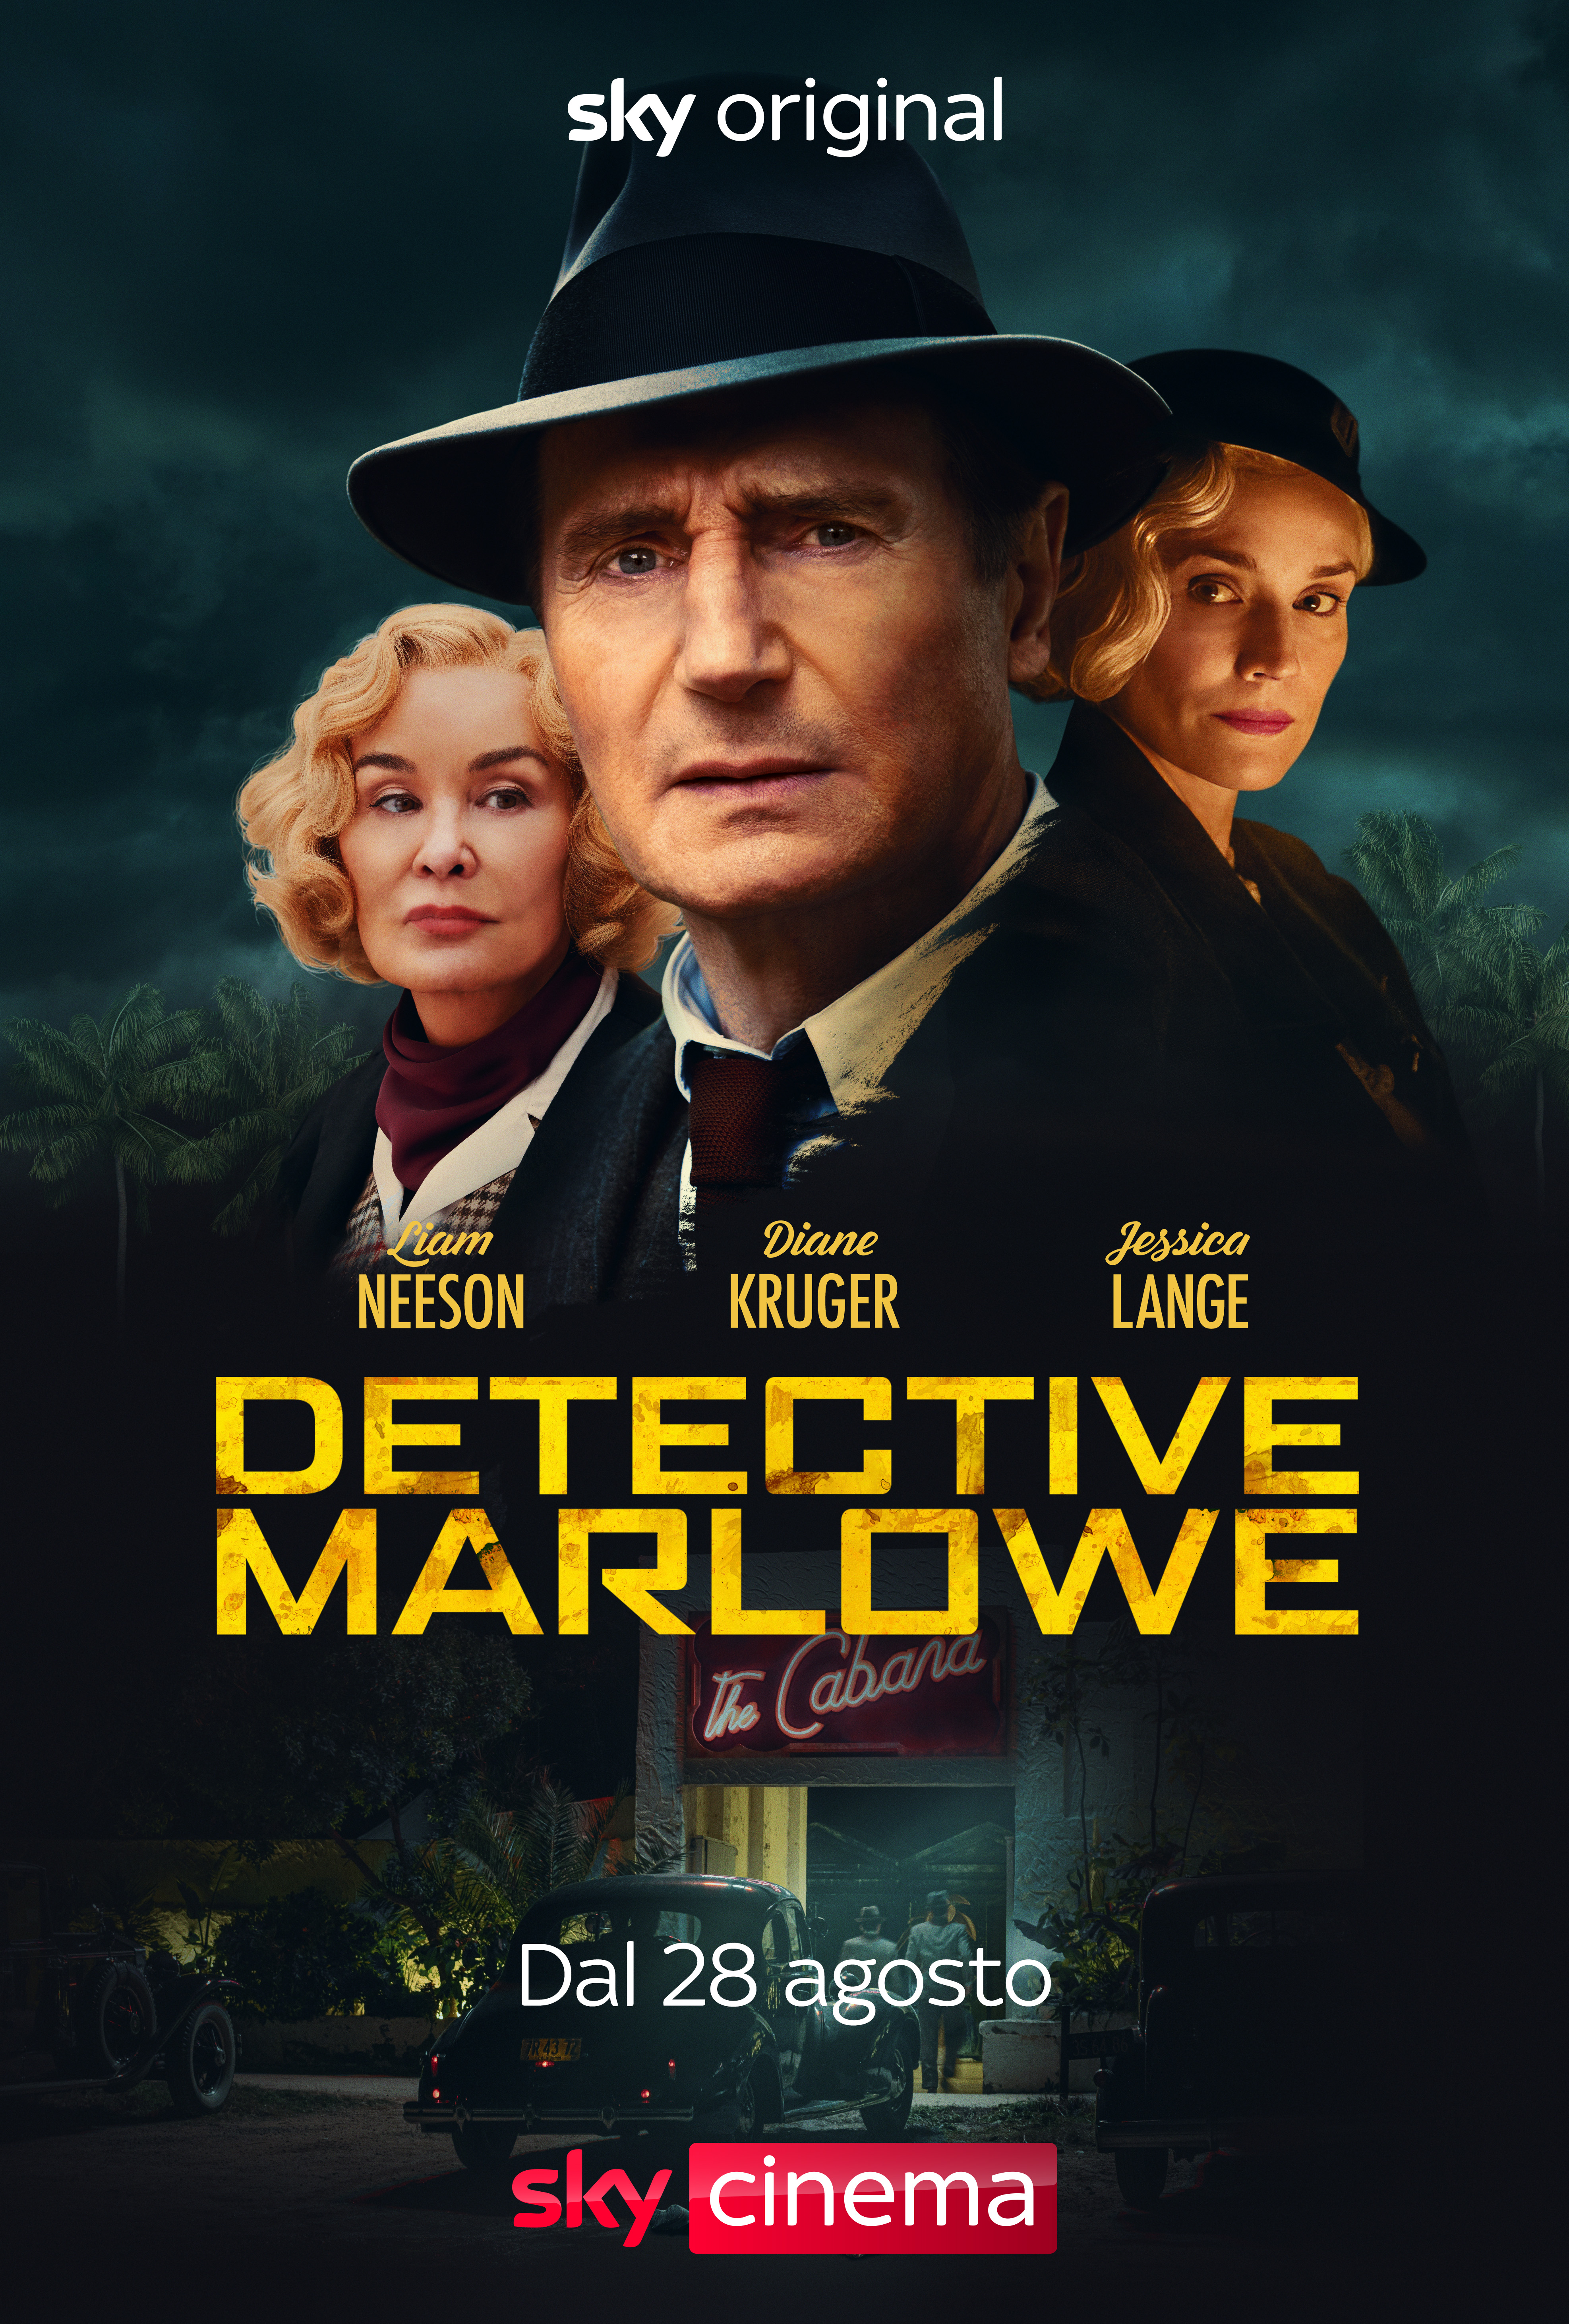 il poster detective marlowe - nerdface